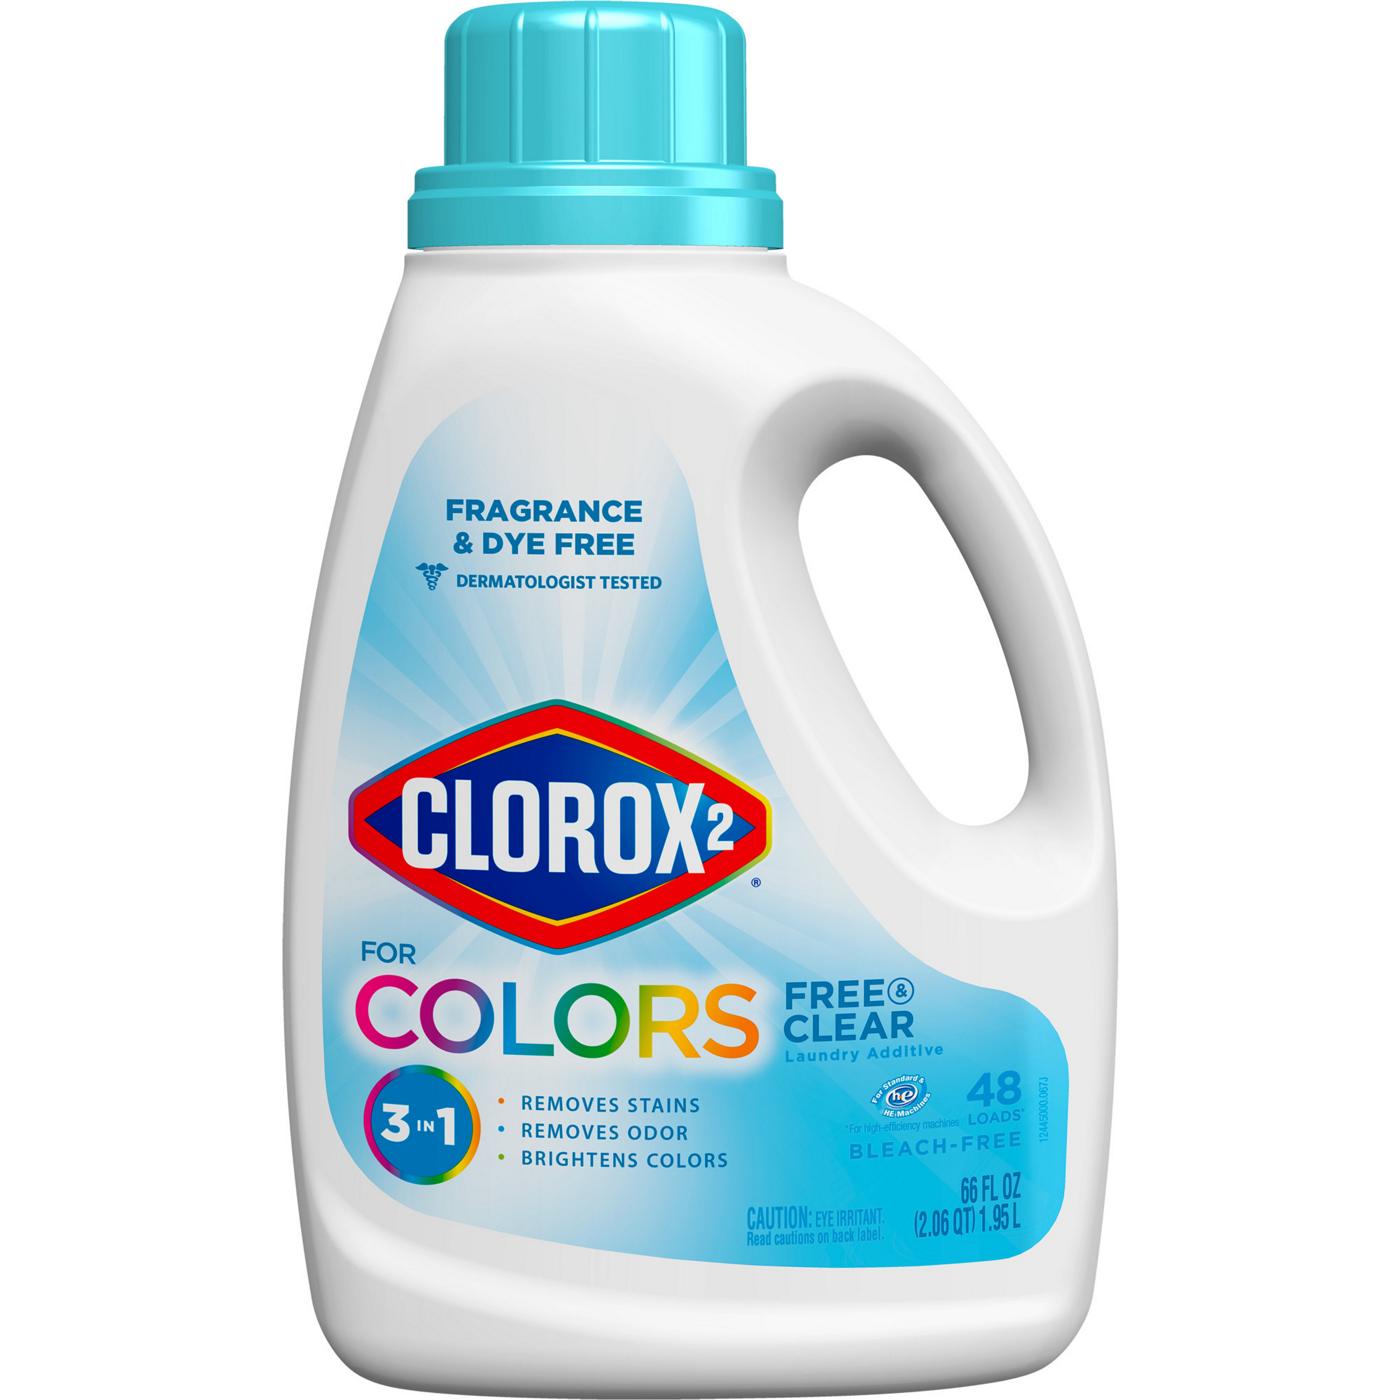 Clorox 2 2 for Colors 3-in-1 HE Laundry Additive, 48 Loads - Free & Clear; image 1 of 3